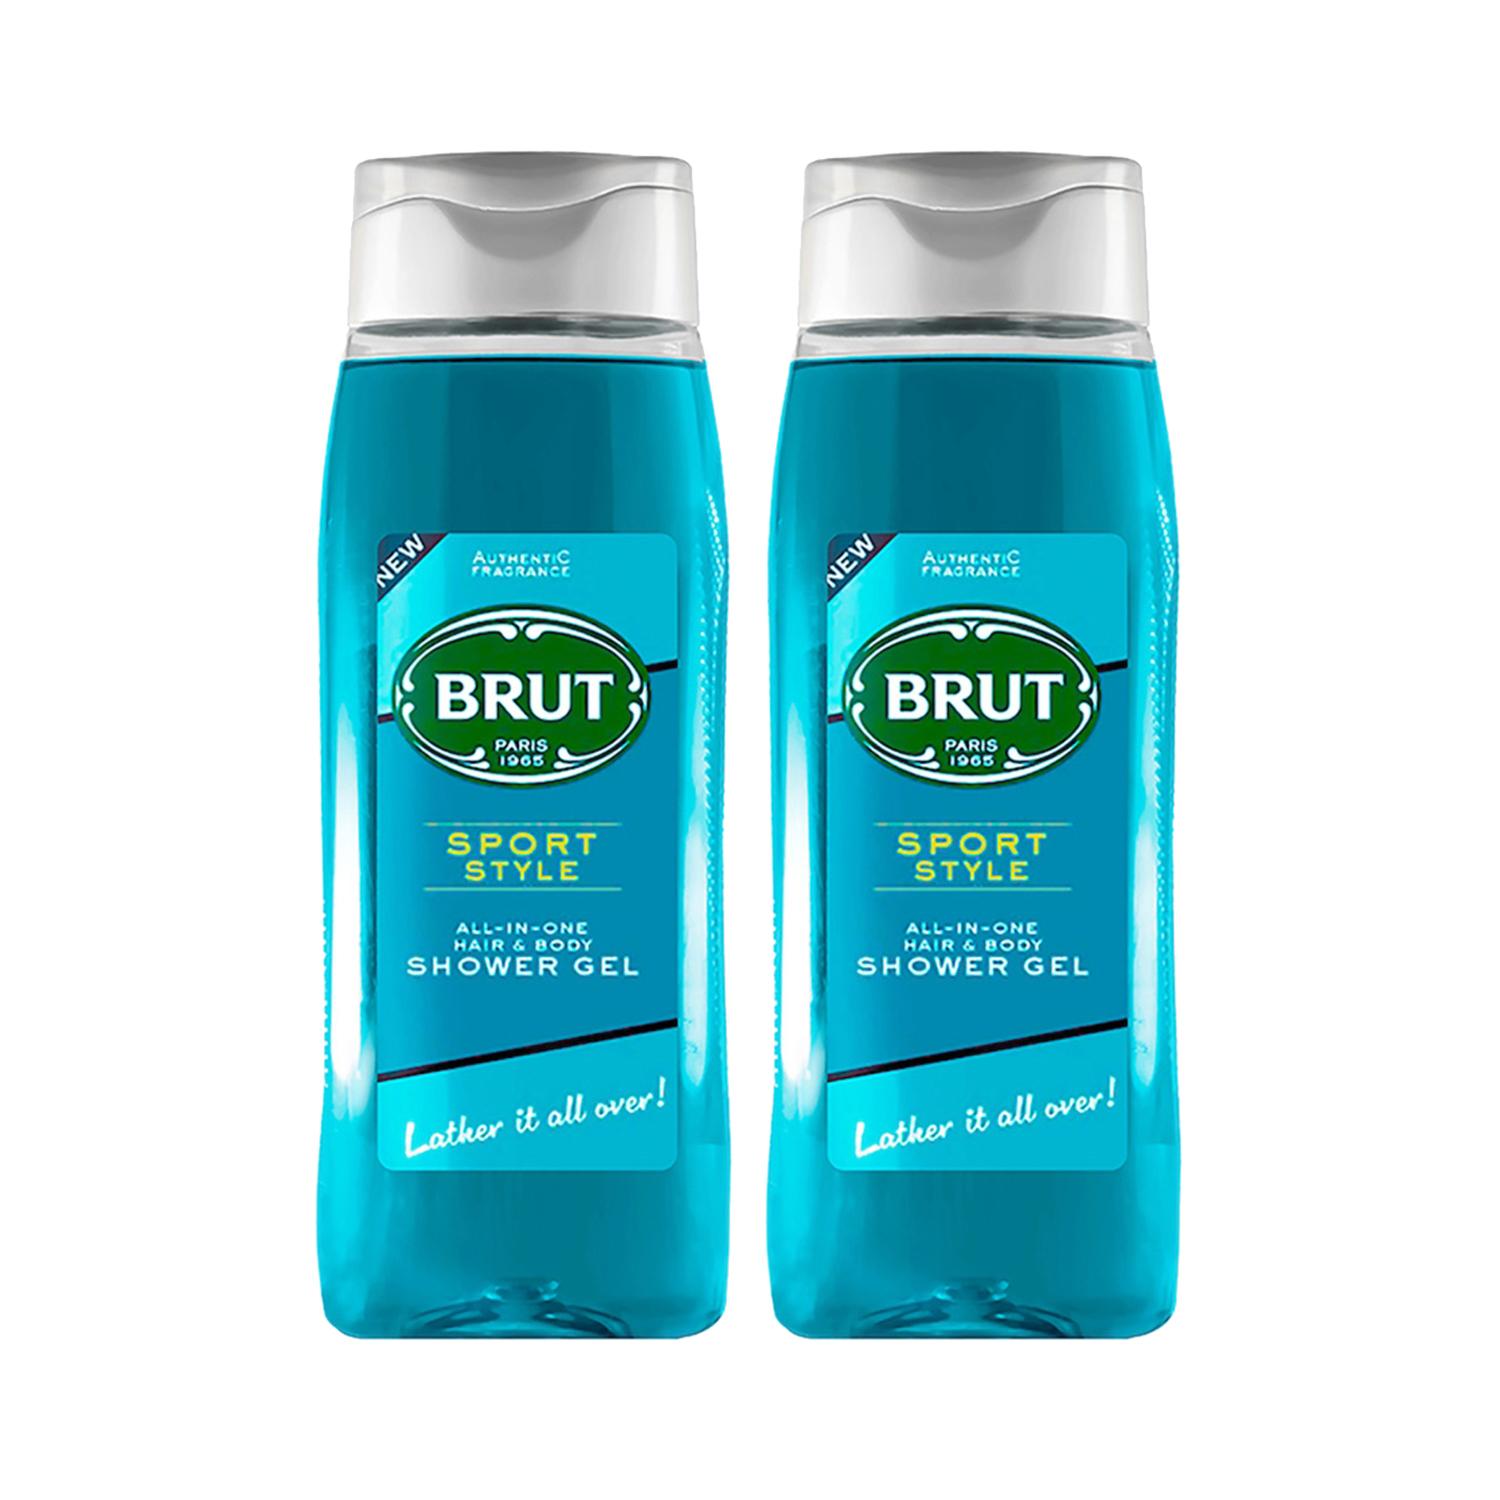 Brut | Brut Sport Style All-In-One Hair and Body Shower Gel (500 ml) (Pack Of 2) Combo